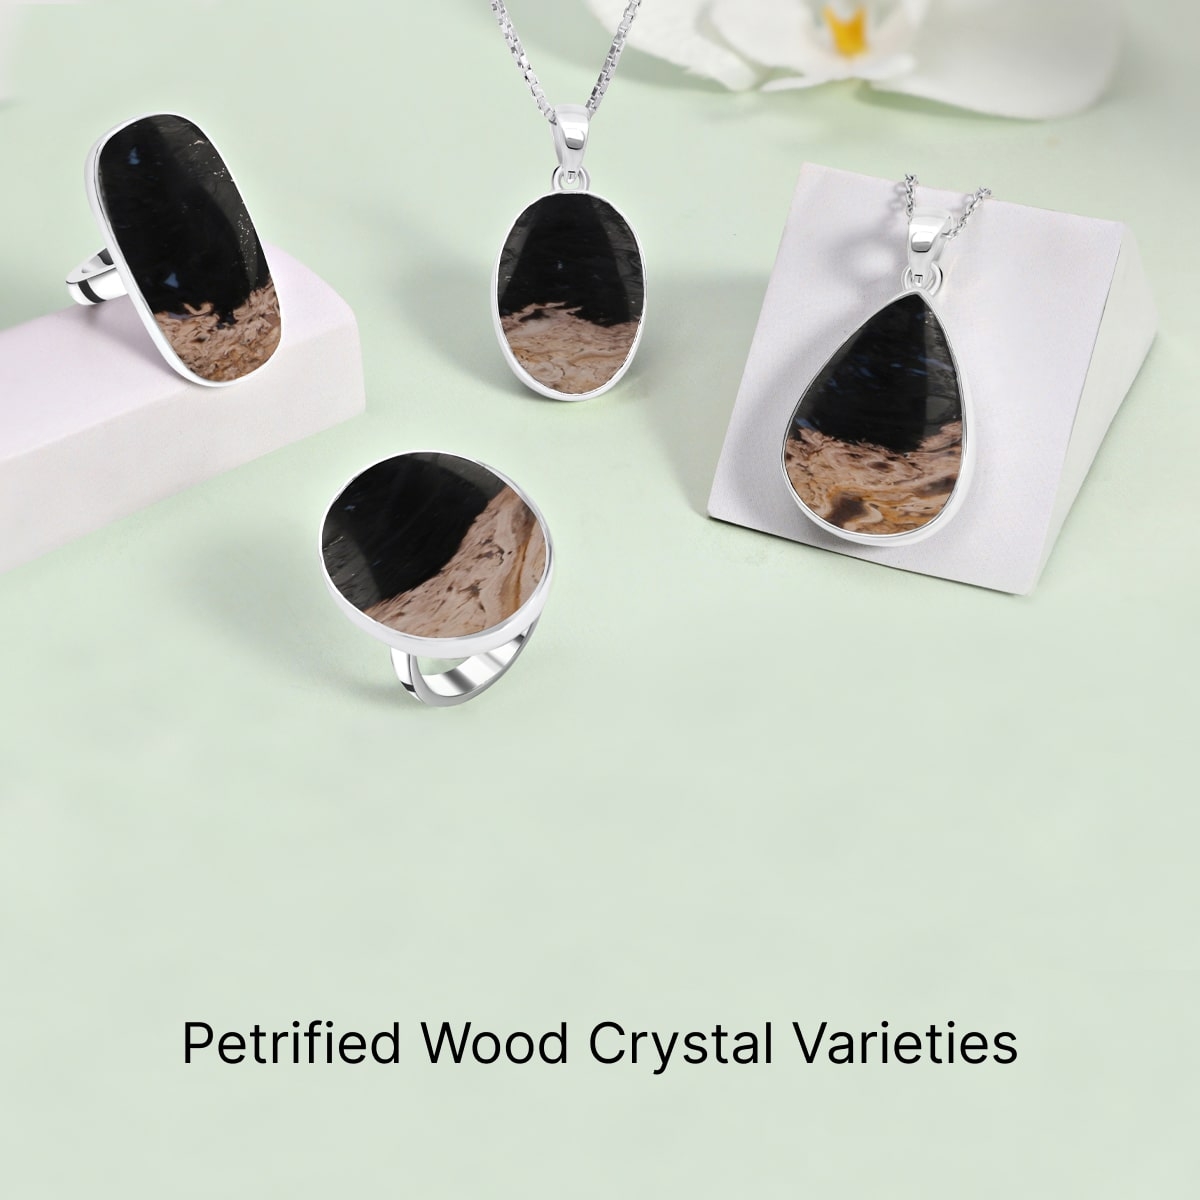 Types of Petrified Wood Crystals